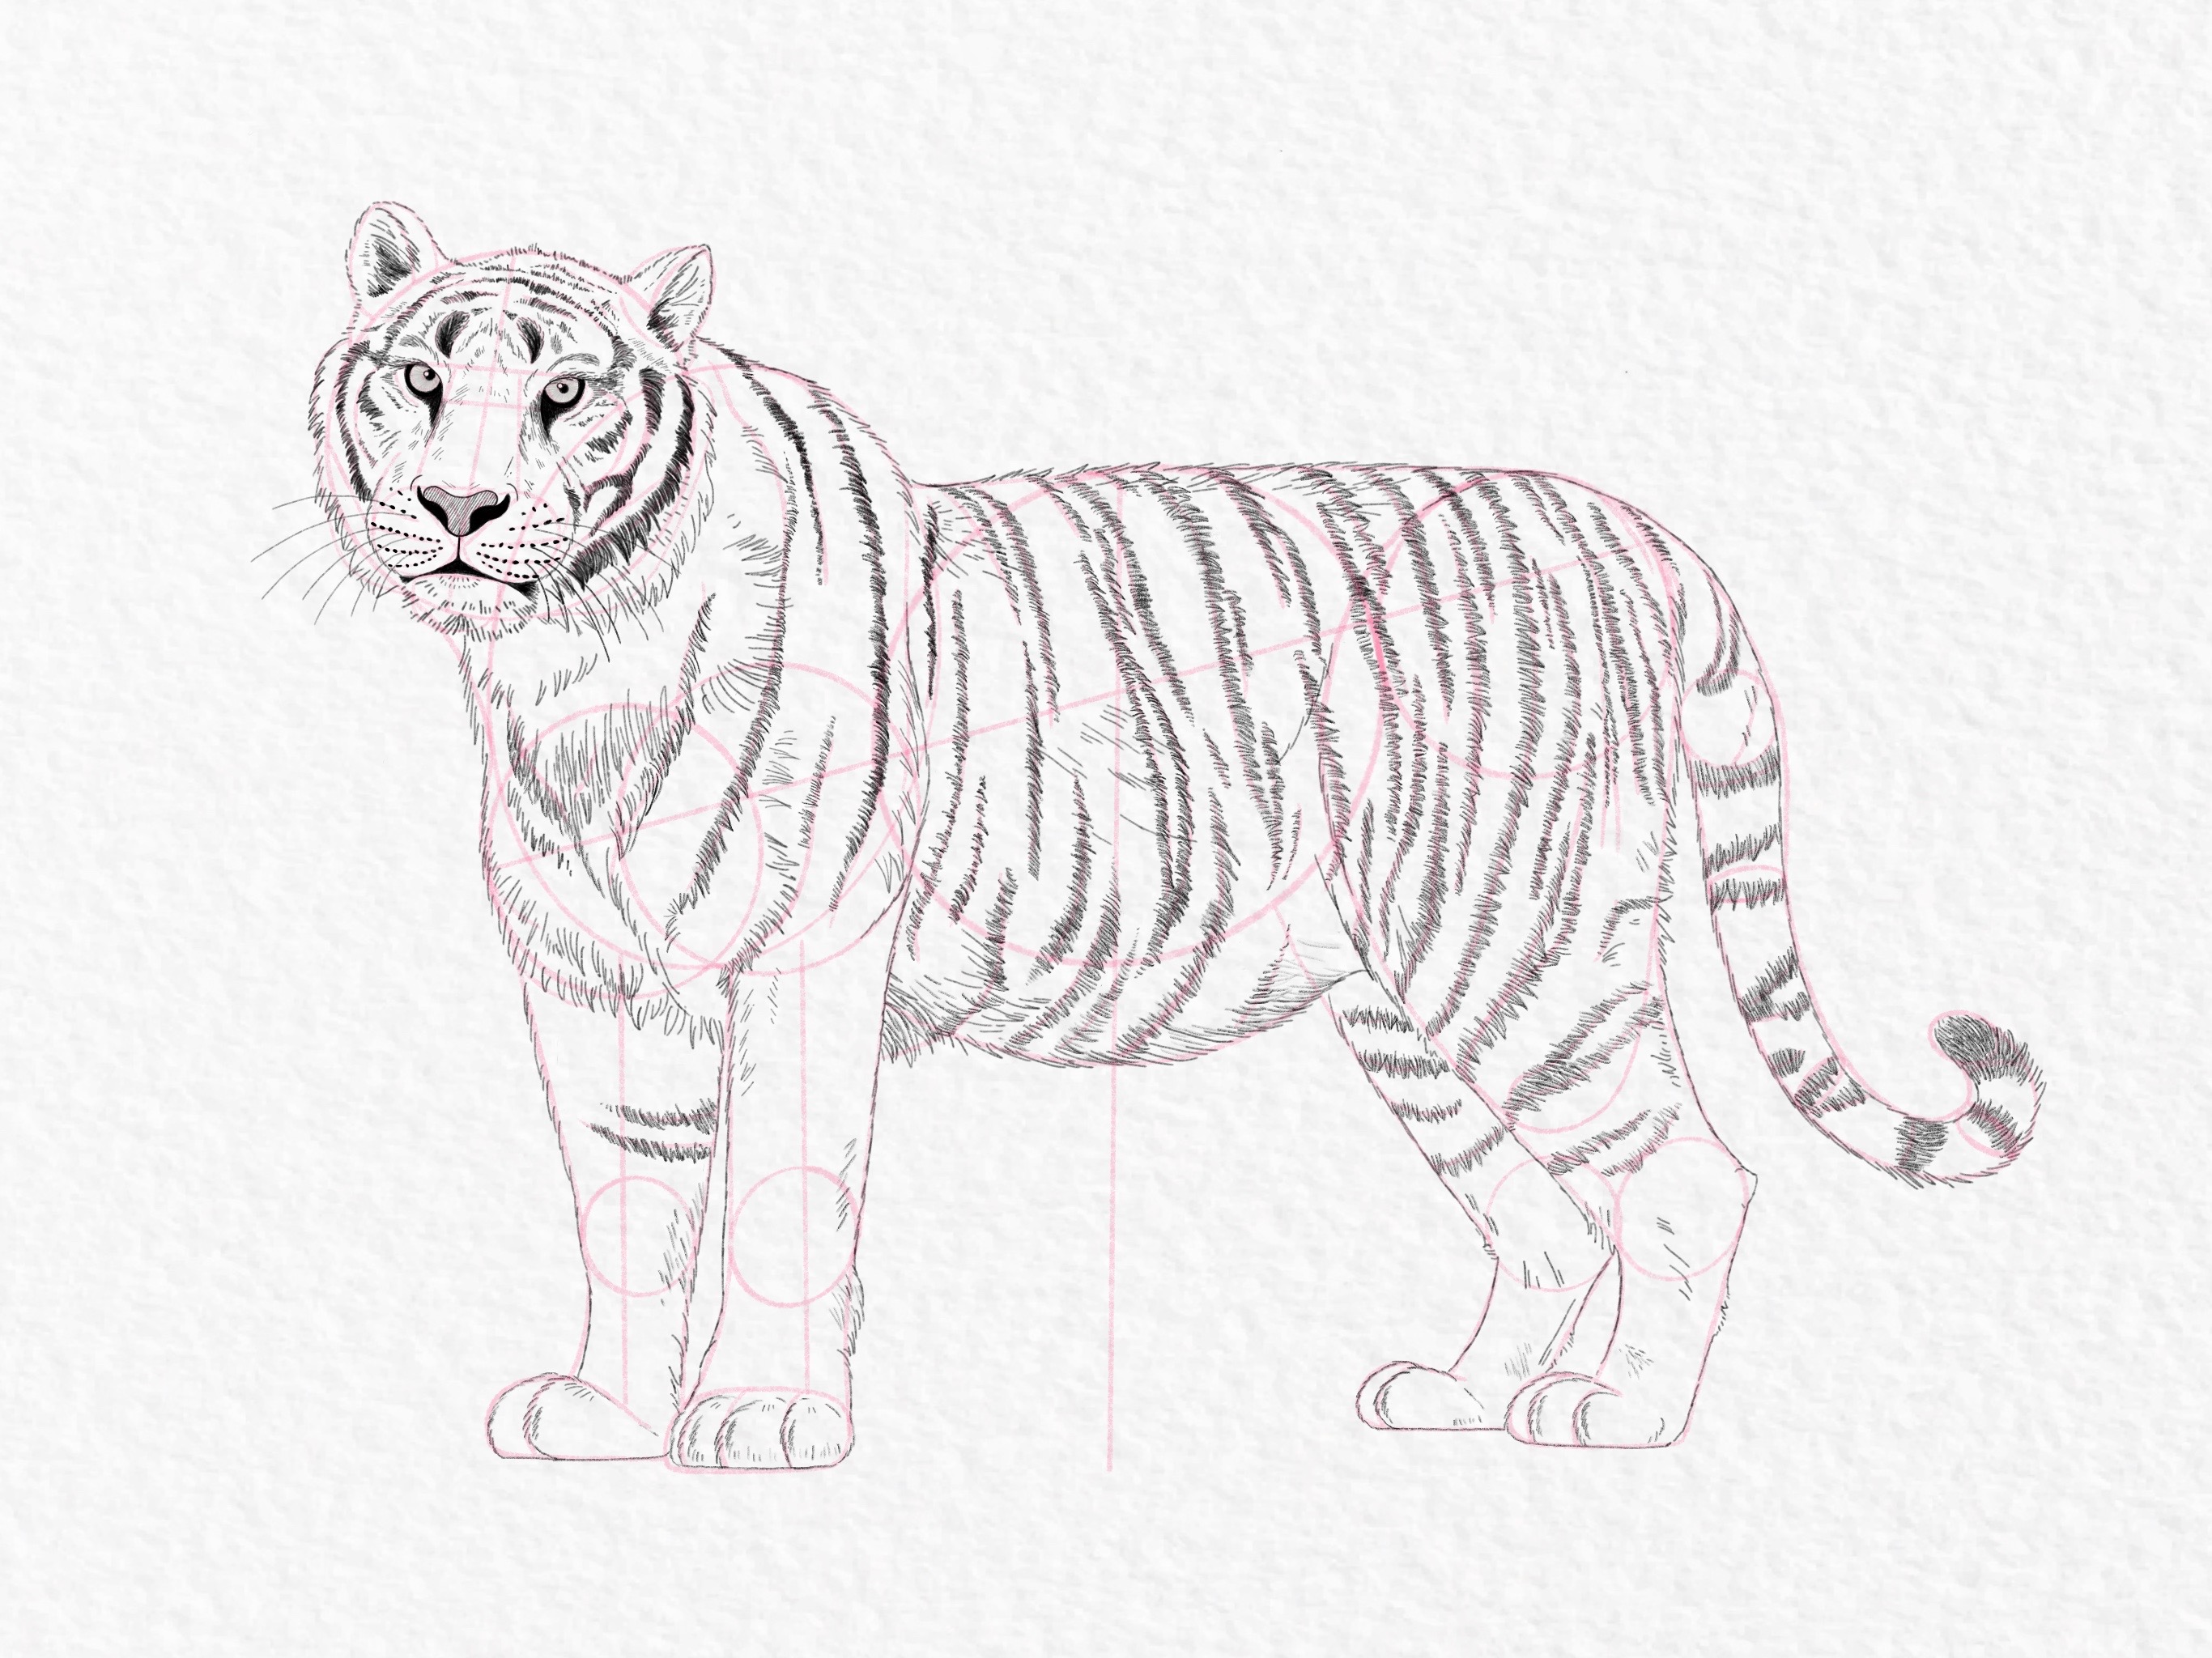 Tiger Drawing coloring page - Download, Print or Color Online for Free